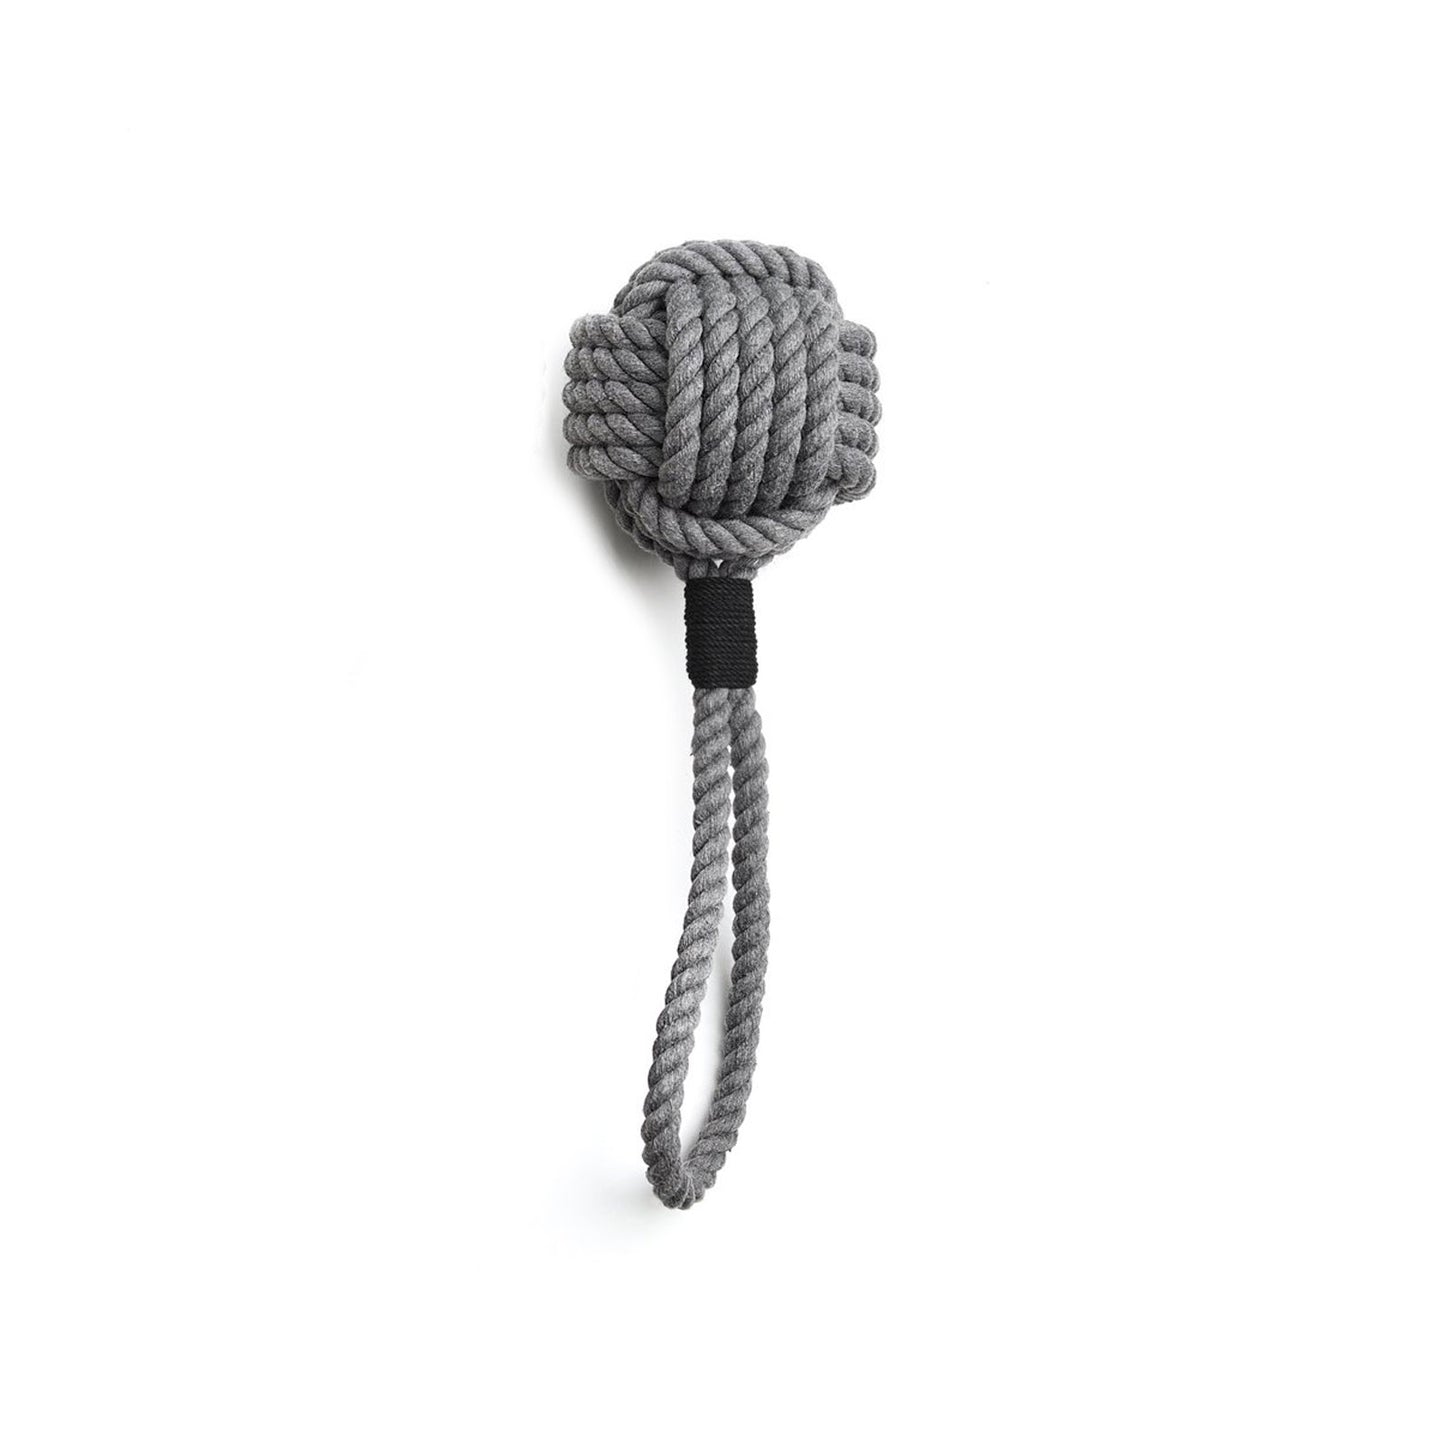 Small Rope Knot Dog Toy in Grey